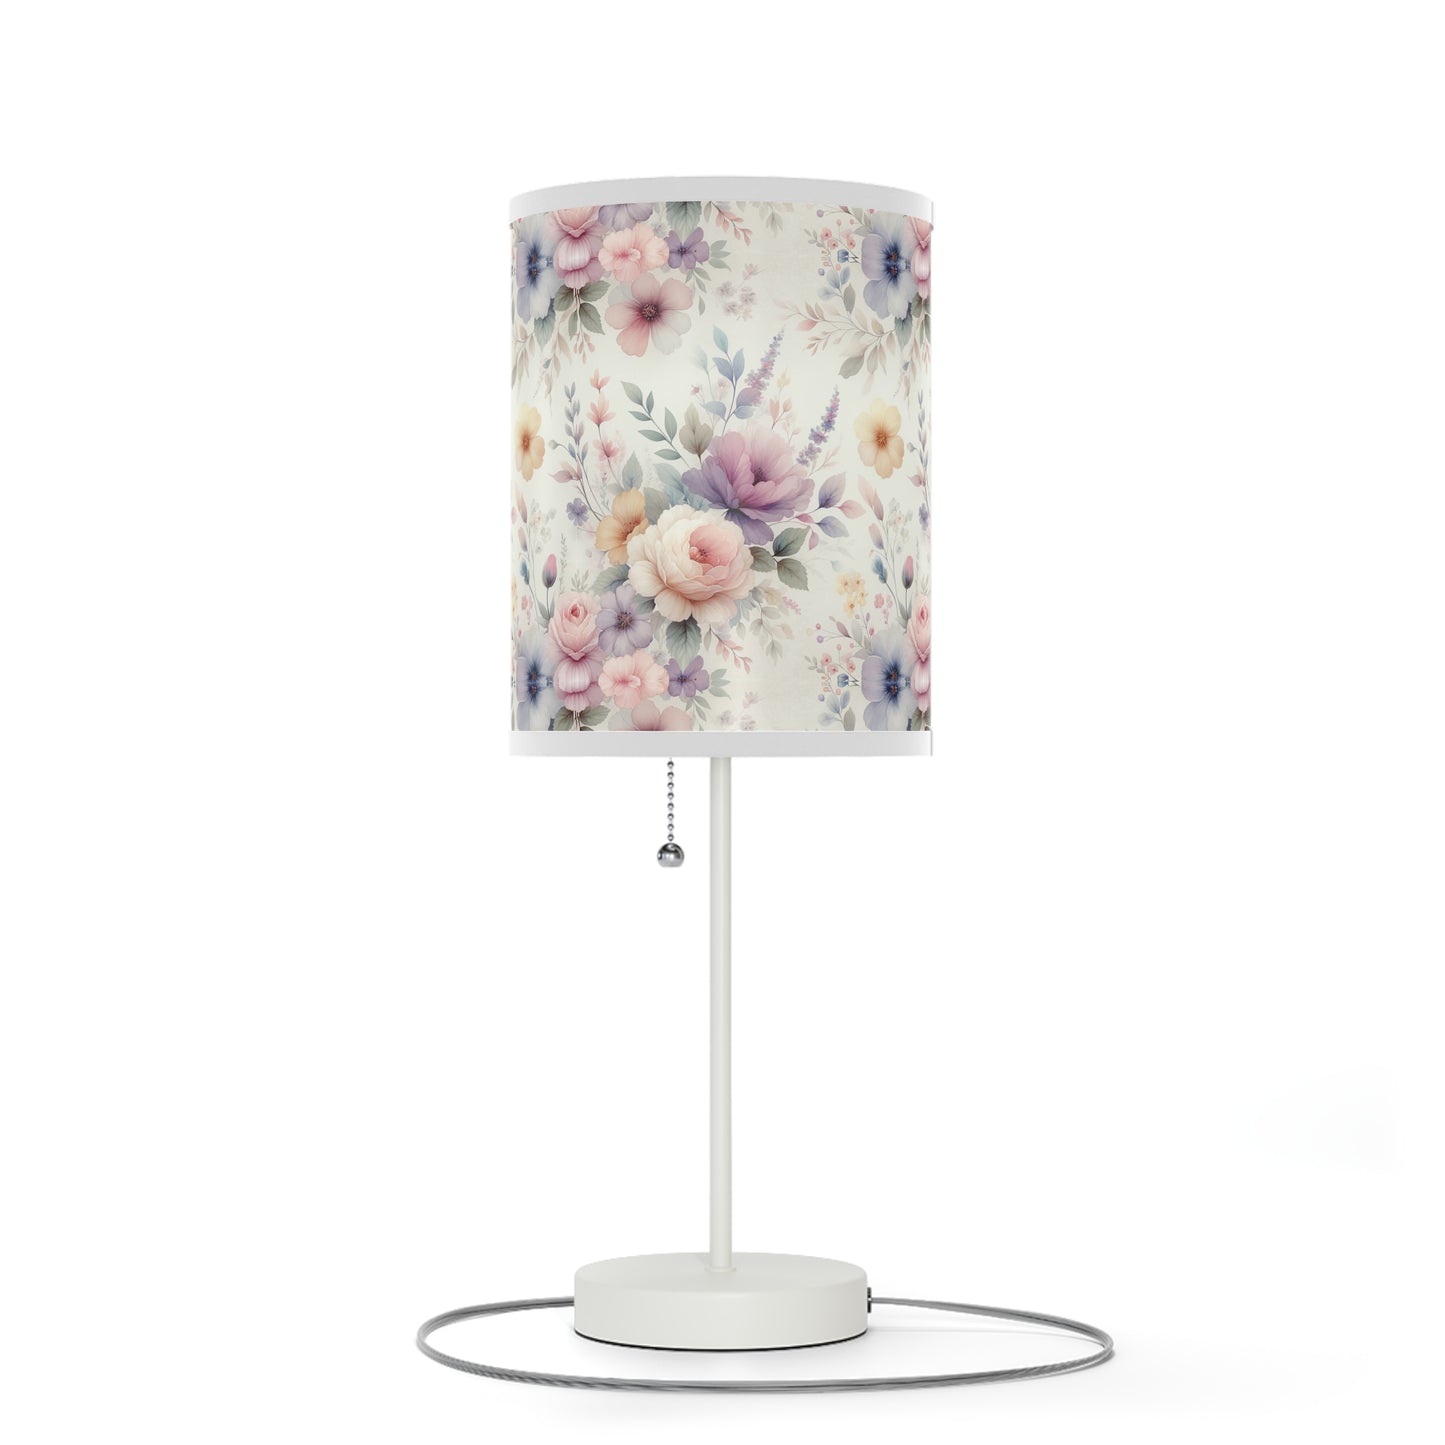 Painterly Petals Table Lamp with Watercolor Garden Pattern